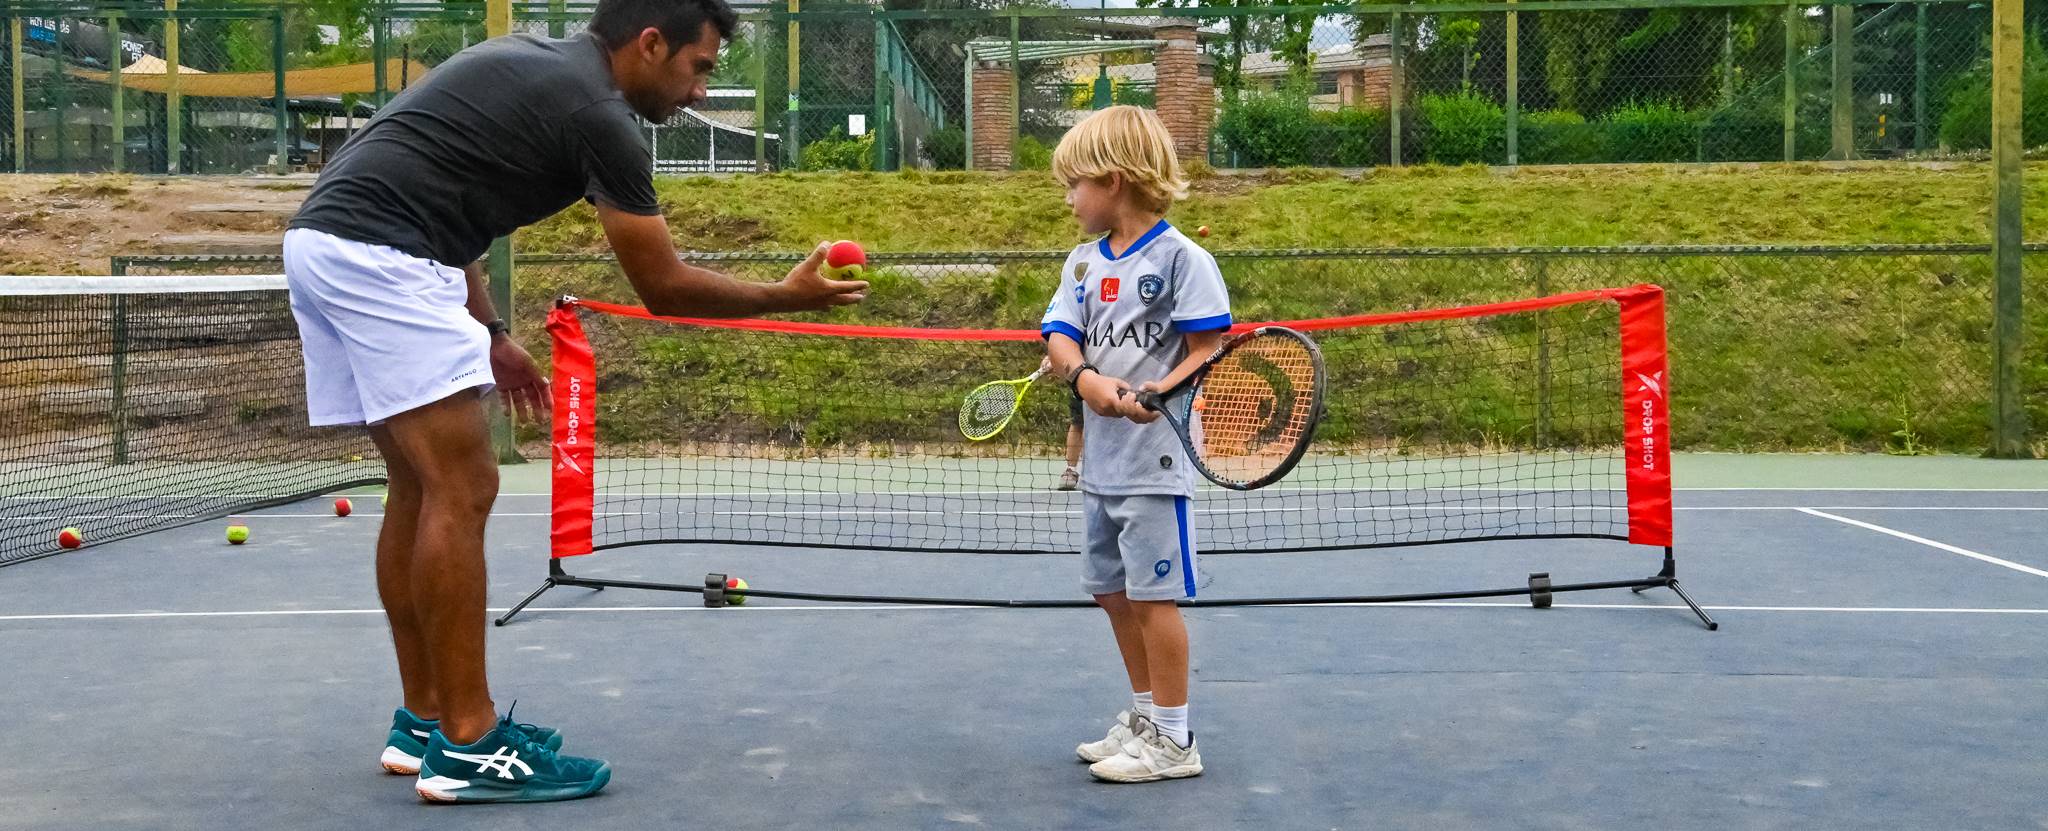 O1- clases particulares tenis.jpg